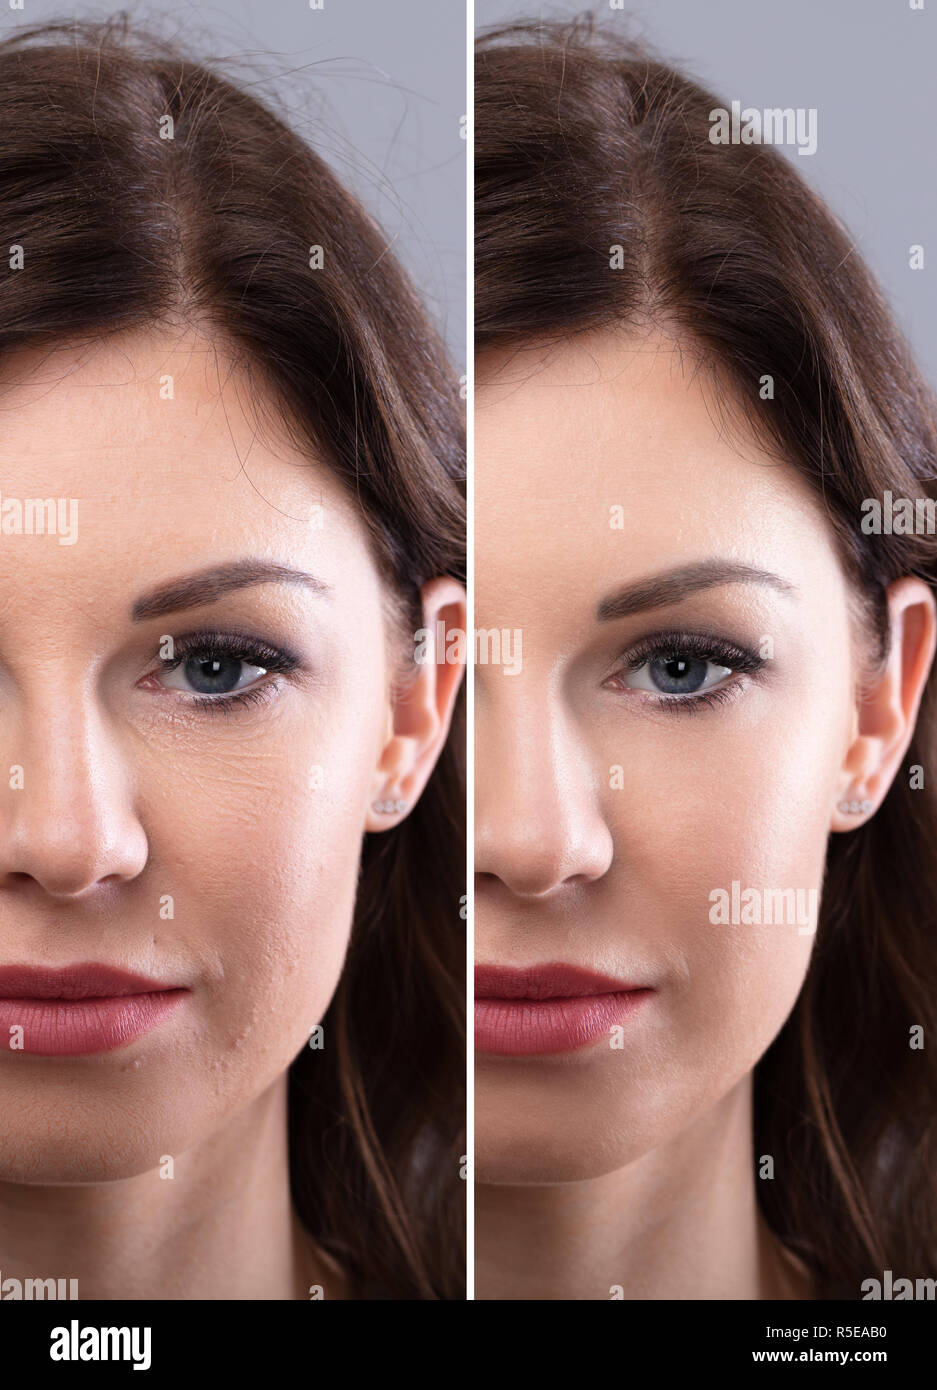 Portrait Of A Young Woman's Face Before And After Cosmetic Procedure Stock Photo